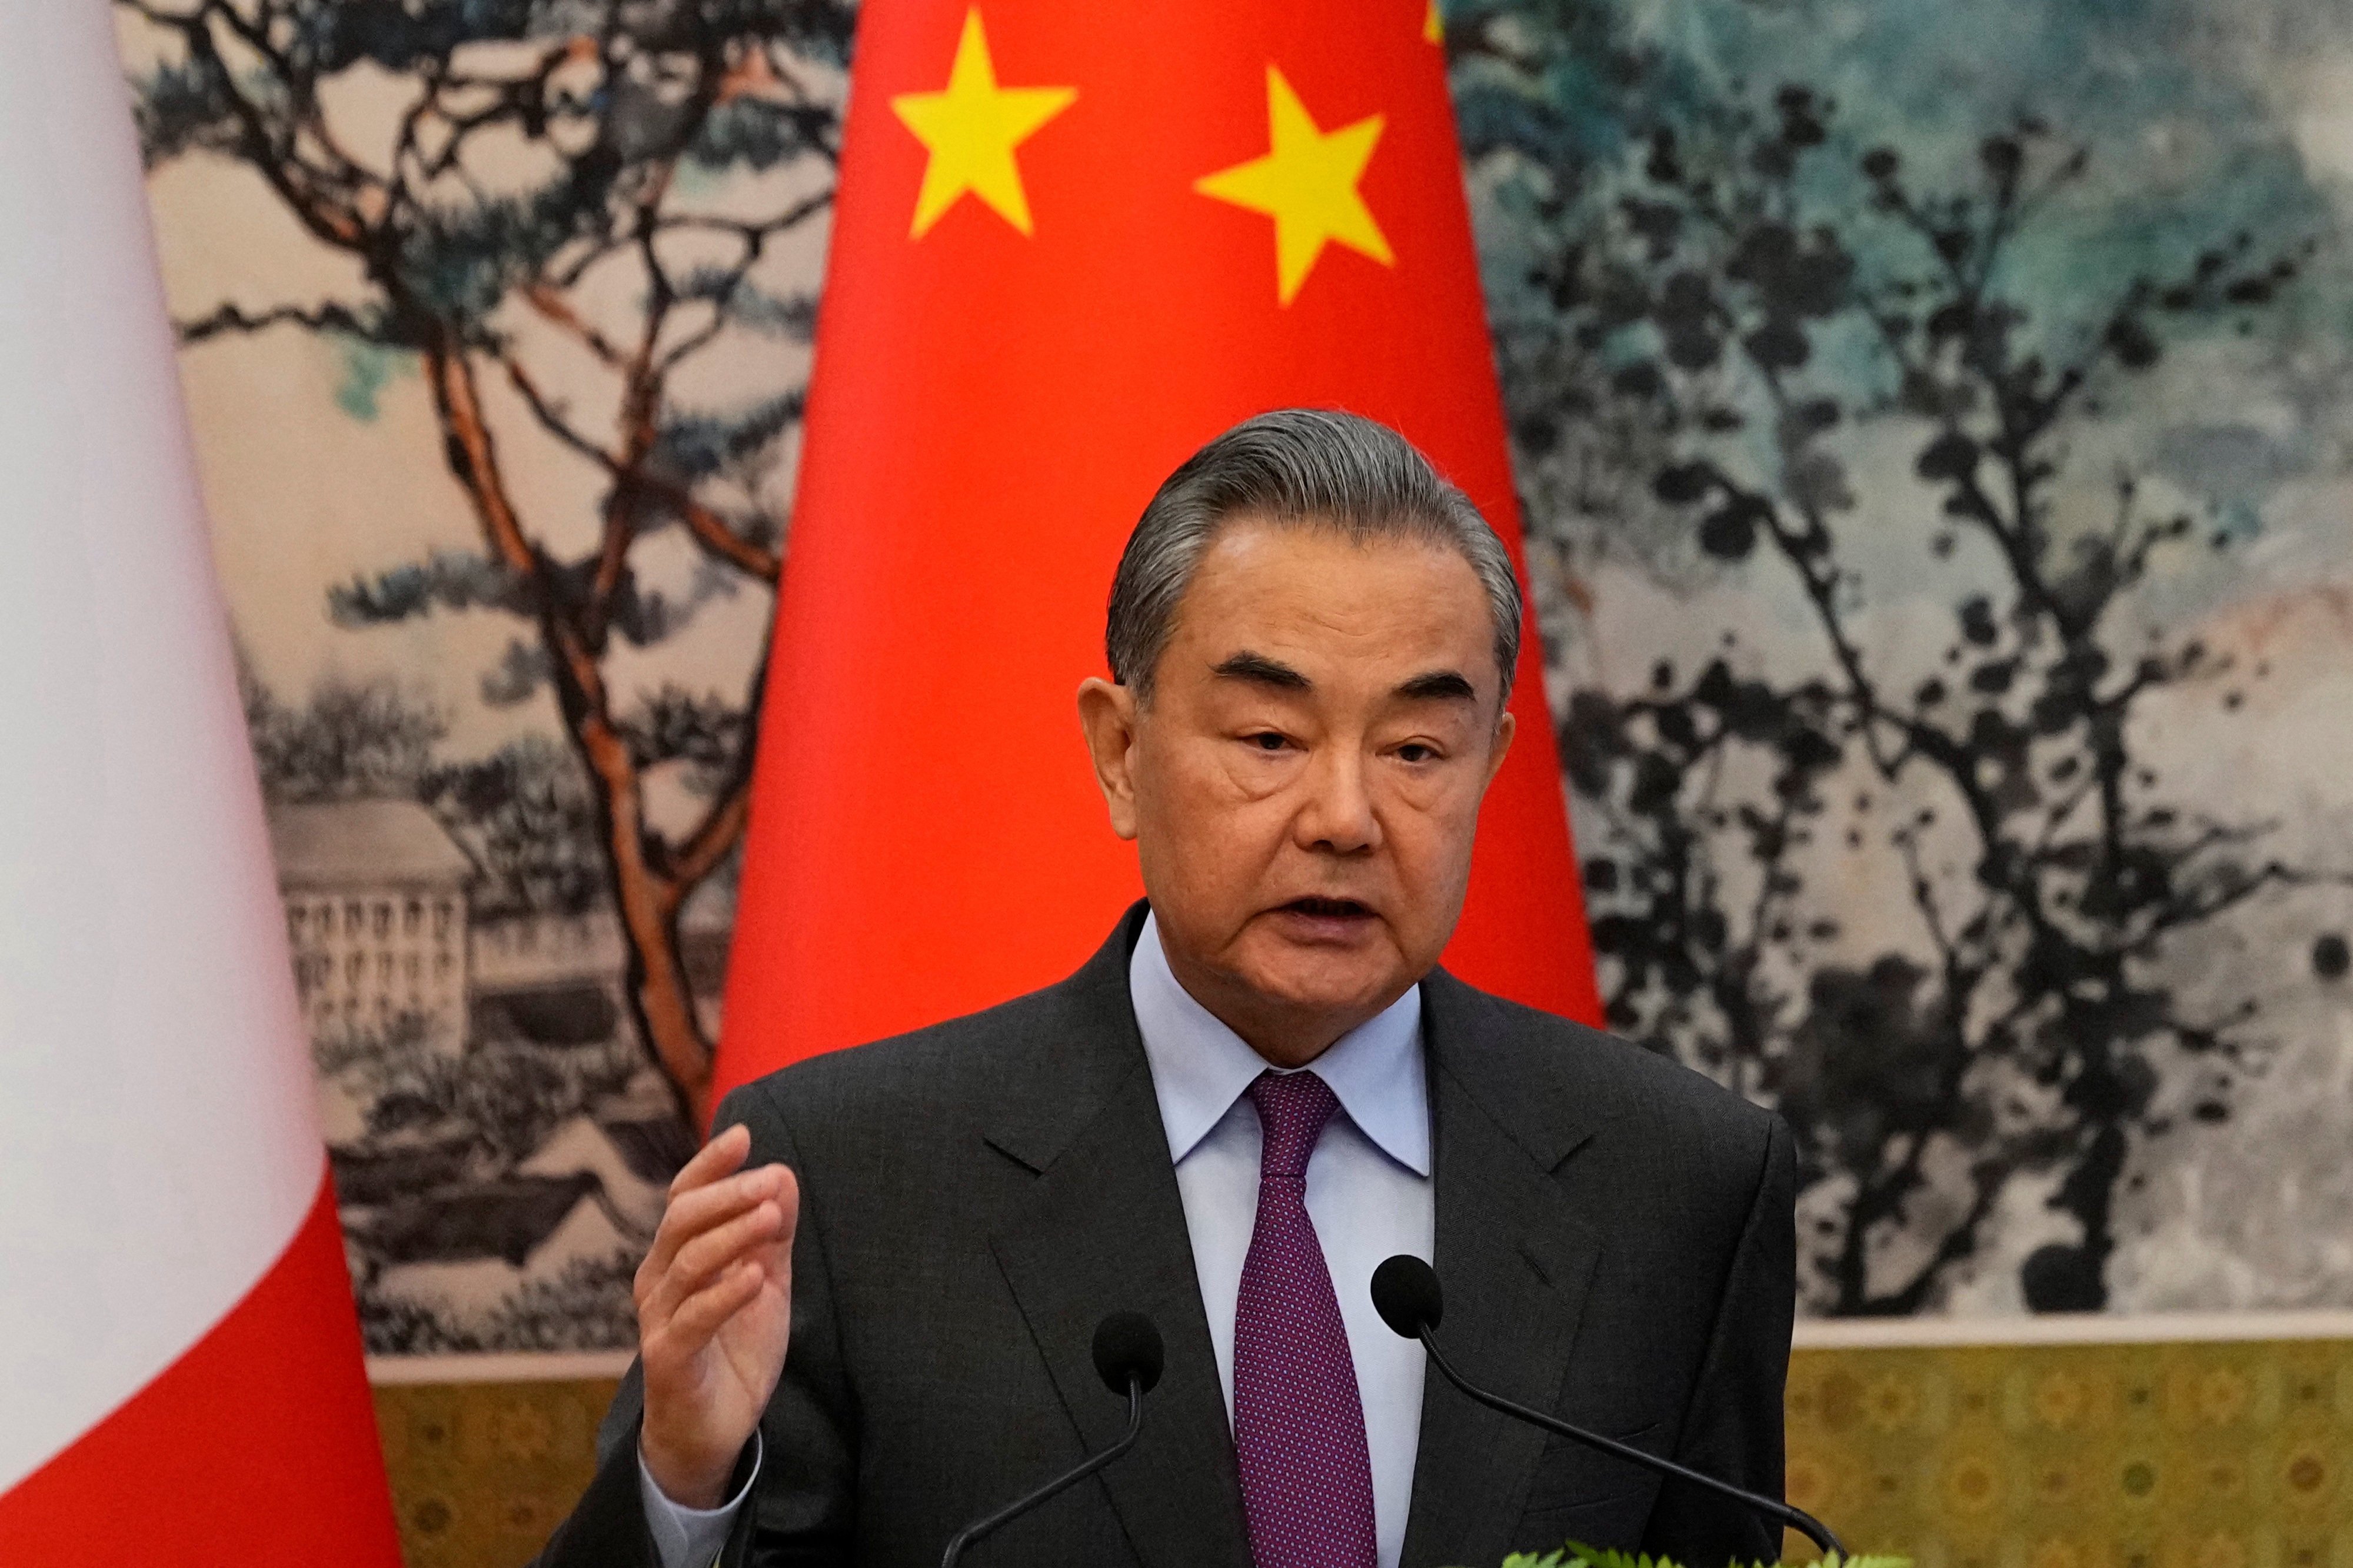 Foreign Minister Wang Yi’s six-day trip comes as China steps up diplomacy with Southeast Asian nations amid increasing strategic competition with the United States in the Asia-Pacific.  Photo: Pool via REUTERS